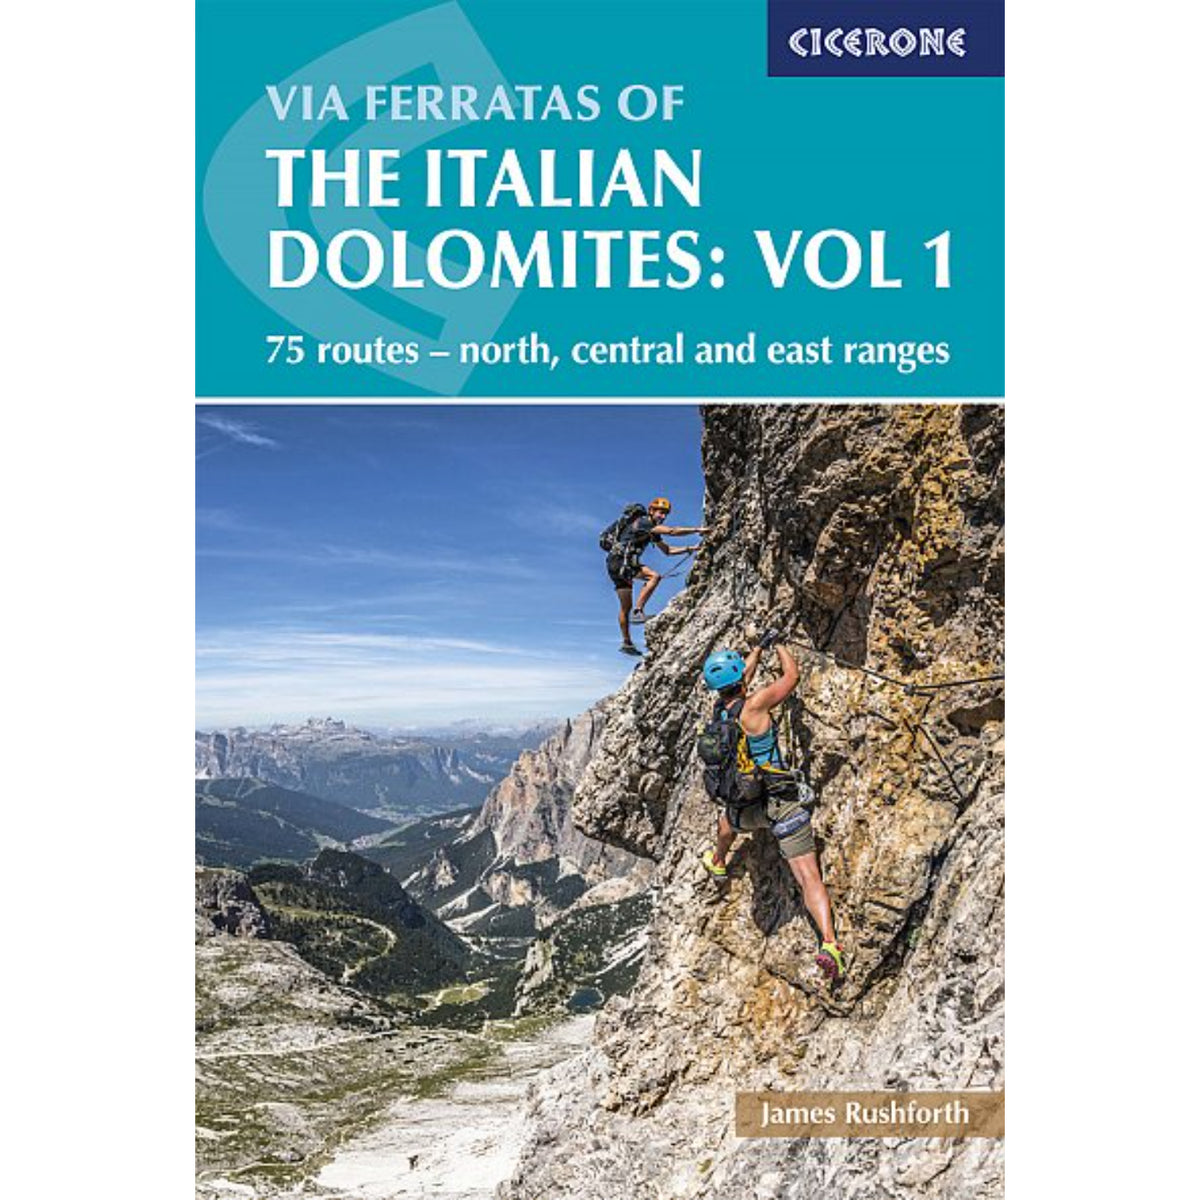 Copy of Via Ferratas Of The Italian Dolomites: Vol 1 - 75 routes - north, central and east ranges